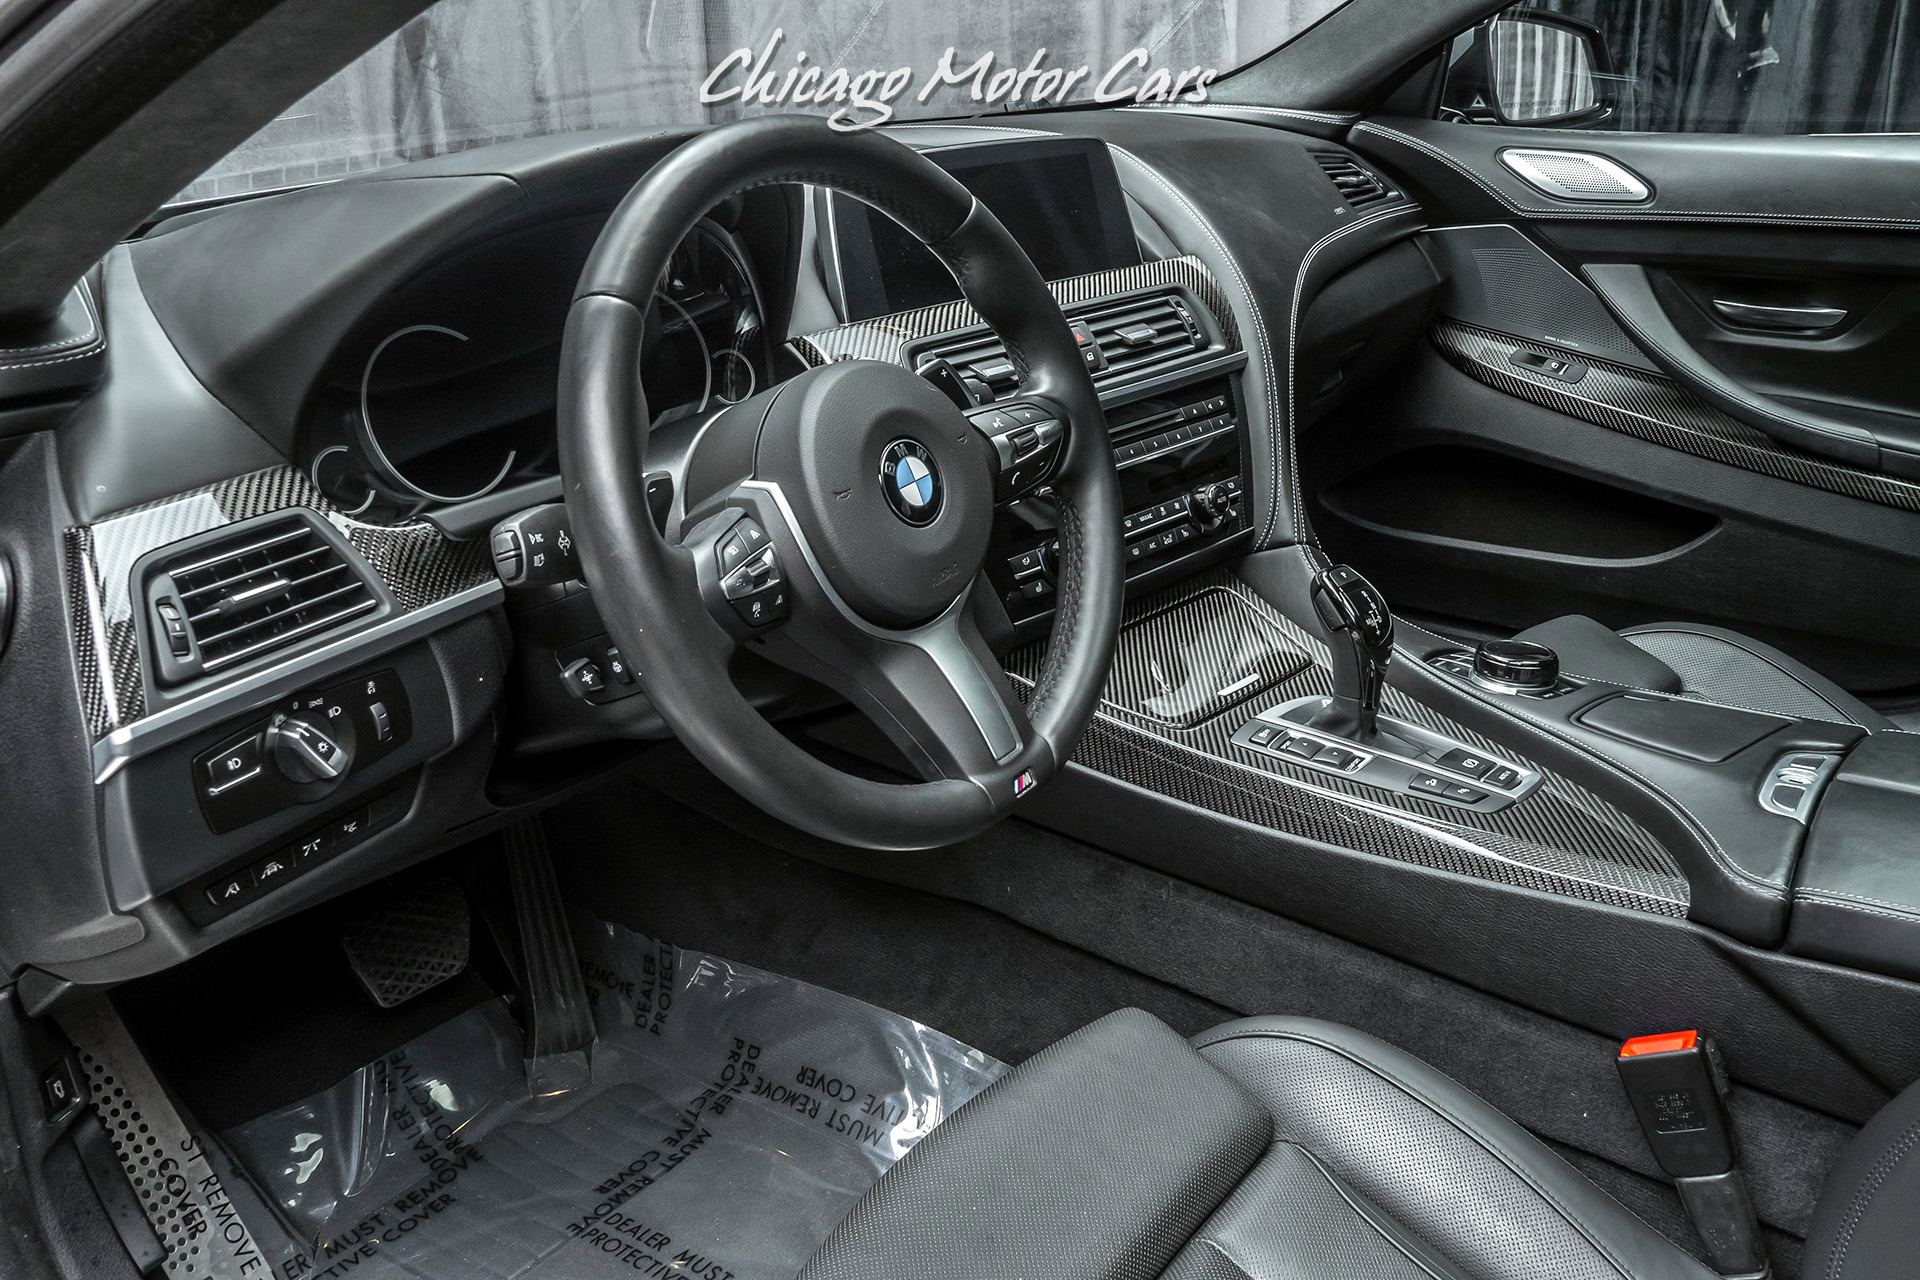 Used 2018 BMW 650i xDrive Gran Coupe MSRP $110K+ M SPORT EDITION! For Sale  (Special Pricing) | Chicago Motor Cars Stock #16380